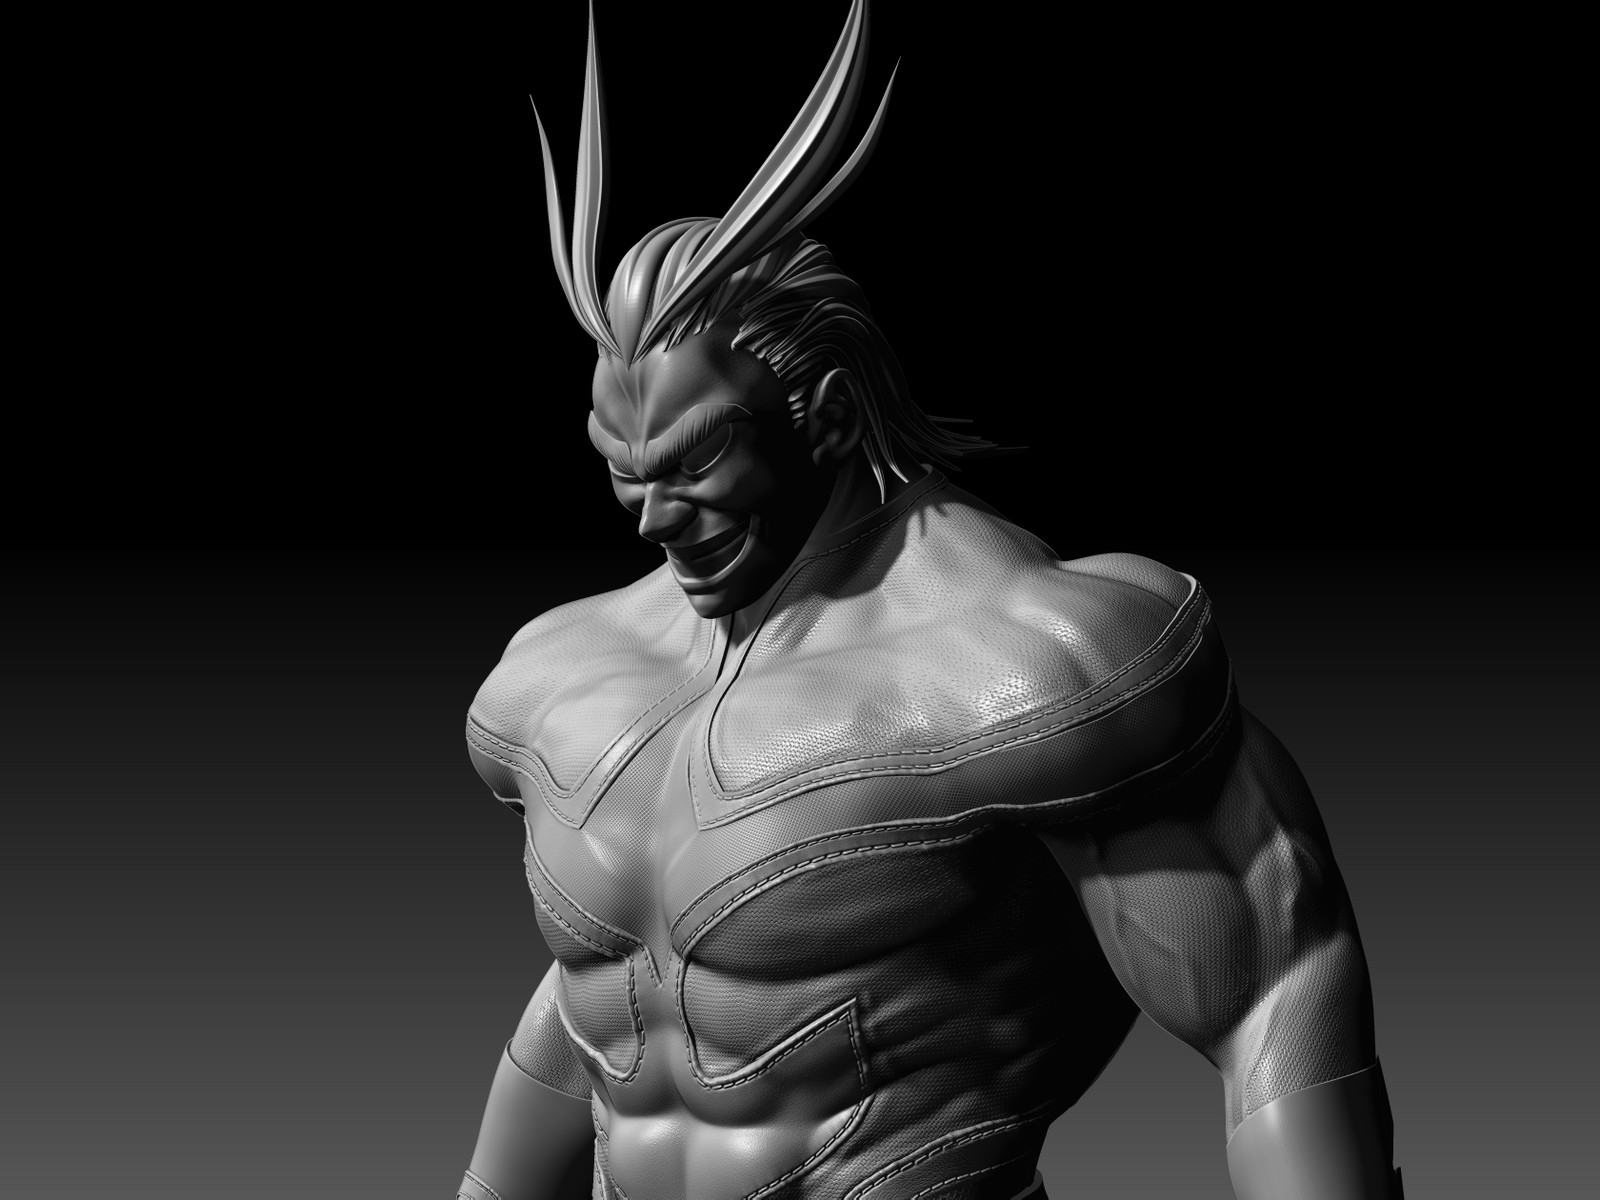 Zbrush without polypaint